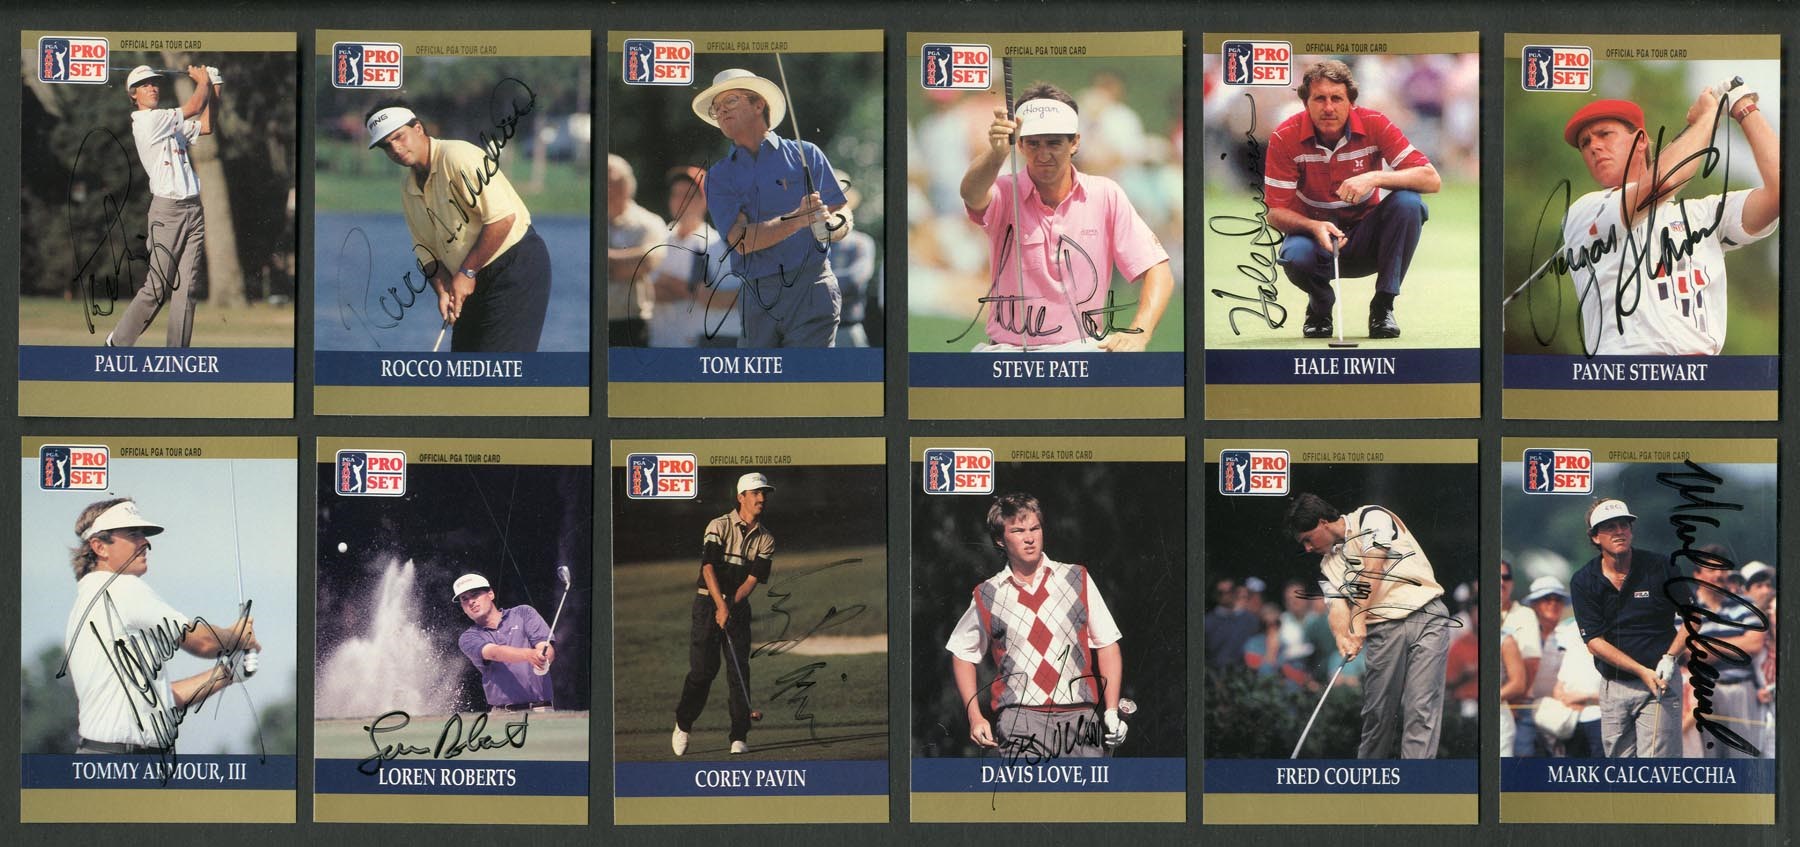 Autographs - 1990-91 Pro Set Golf Complete Card Sets with () Signed including Payne Stewart